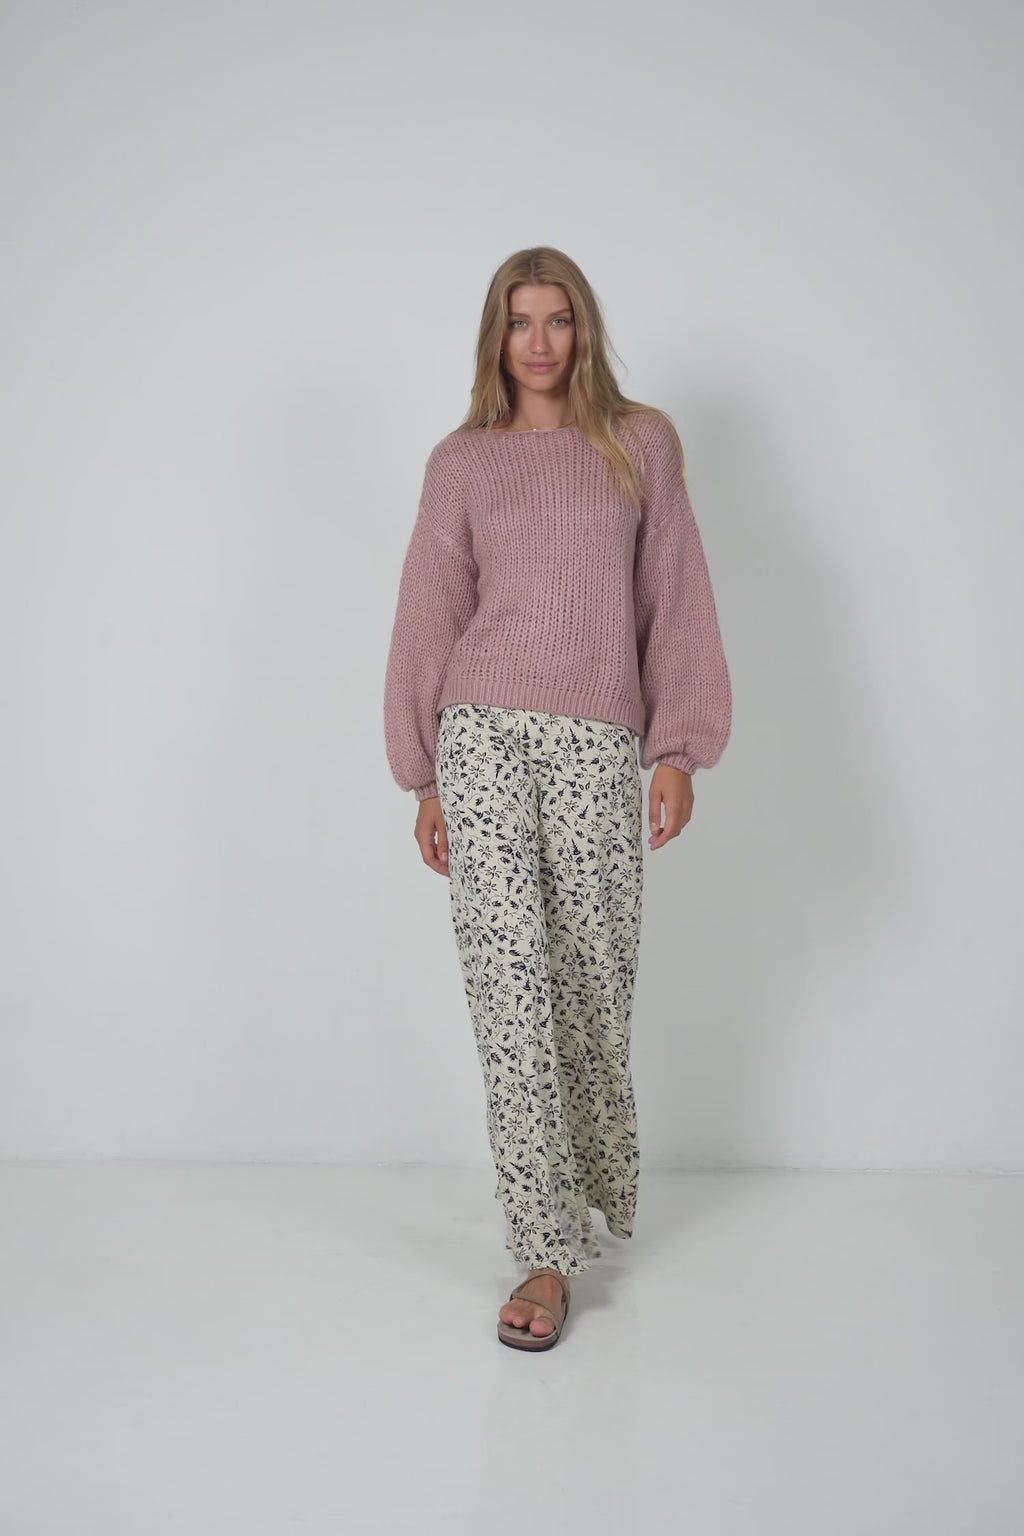 A Model Wearing Floral 70's Flare Leg Pants